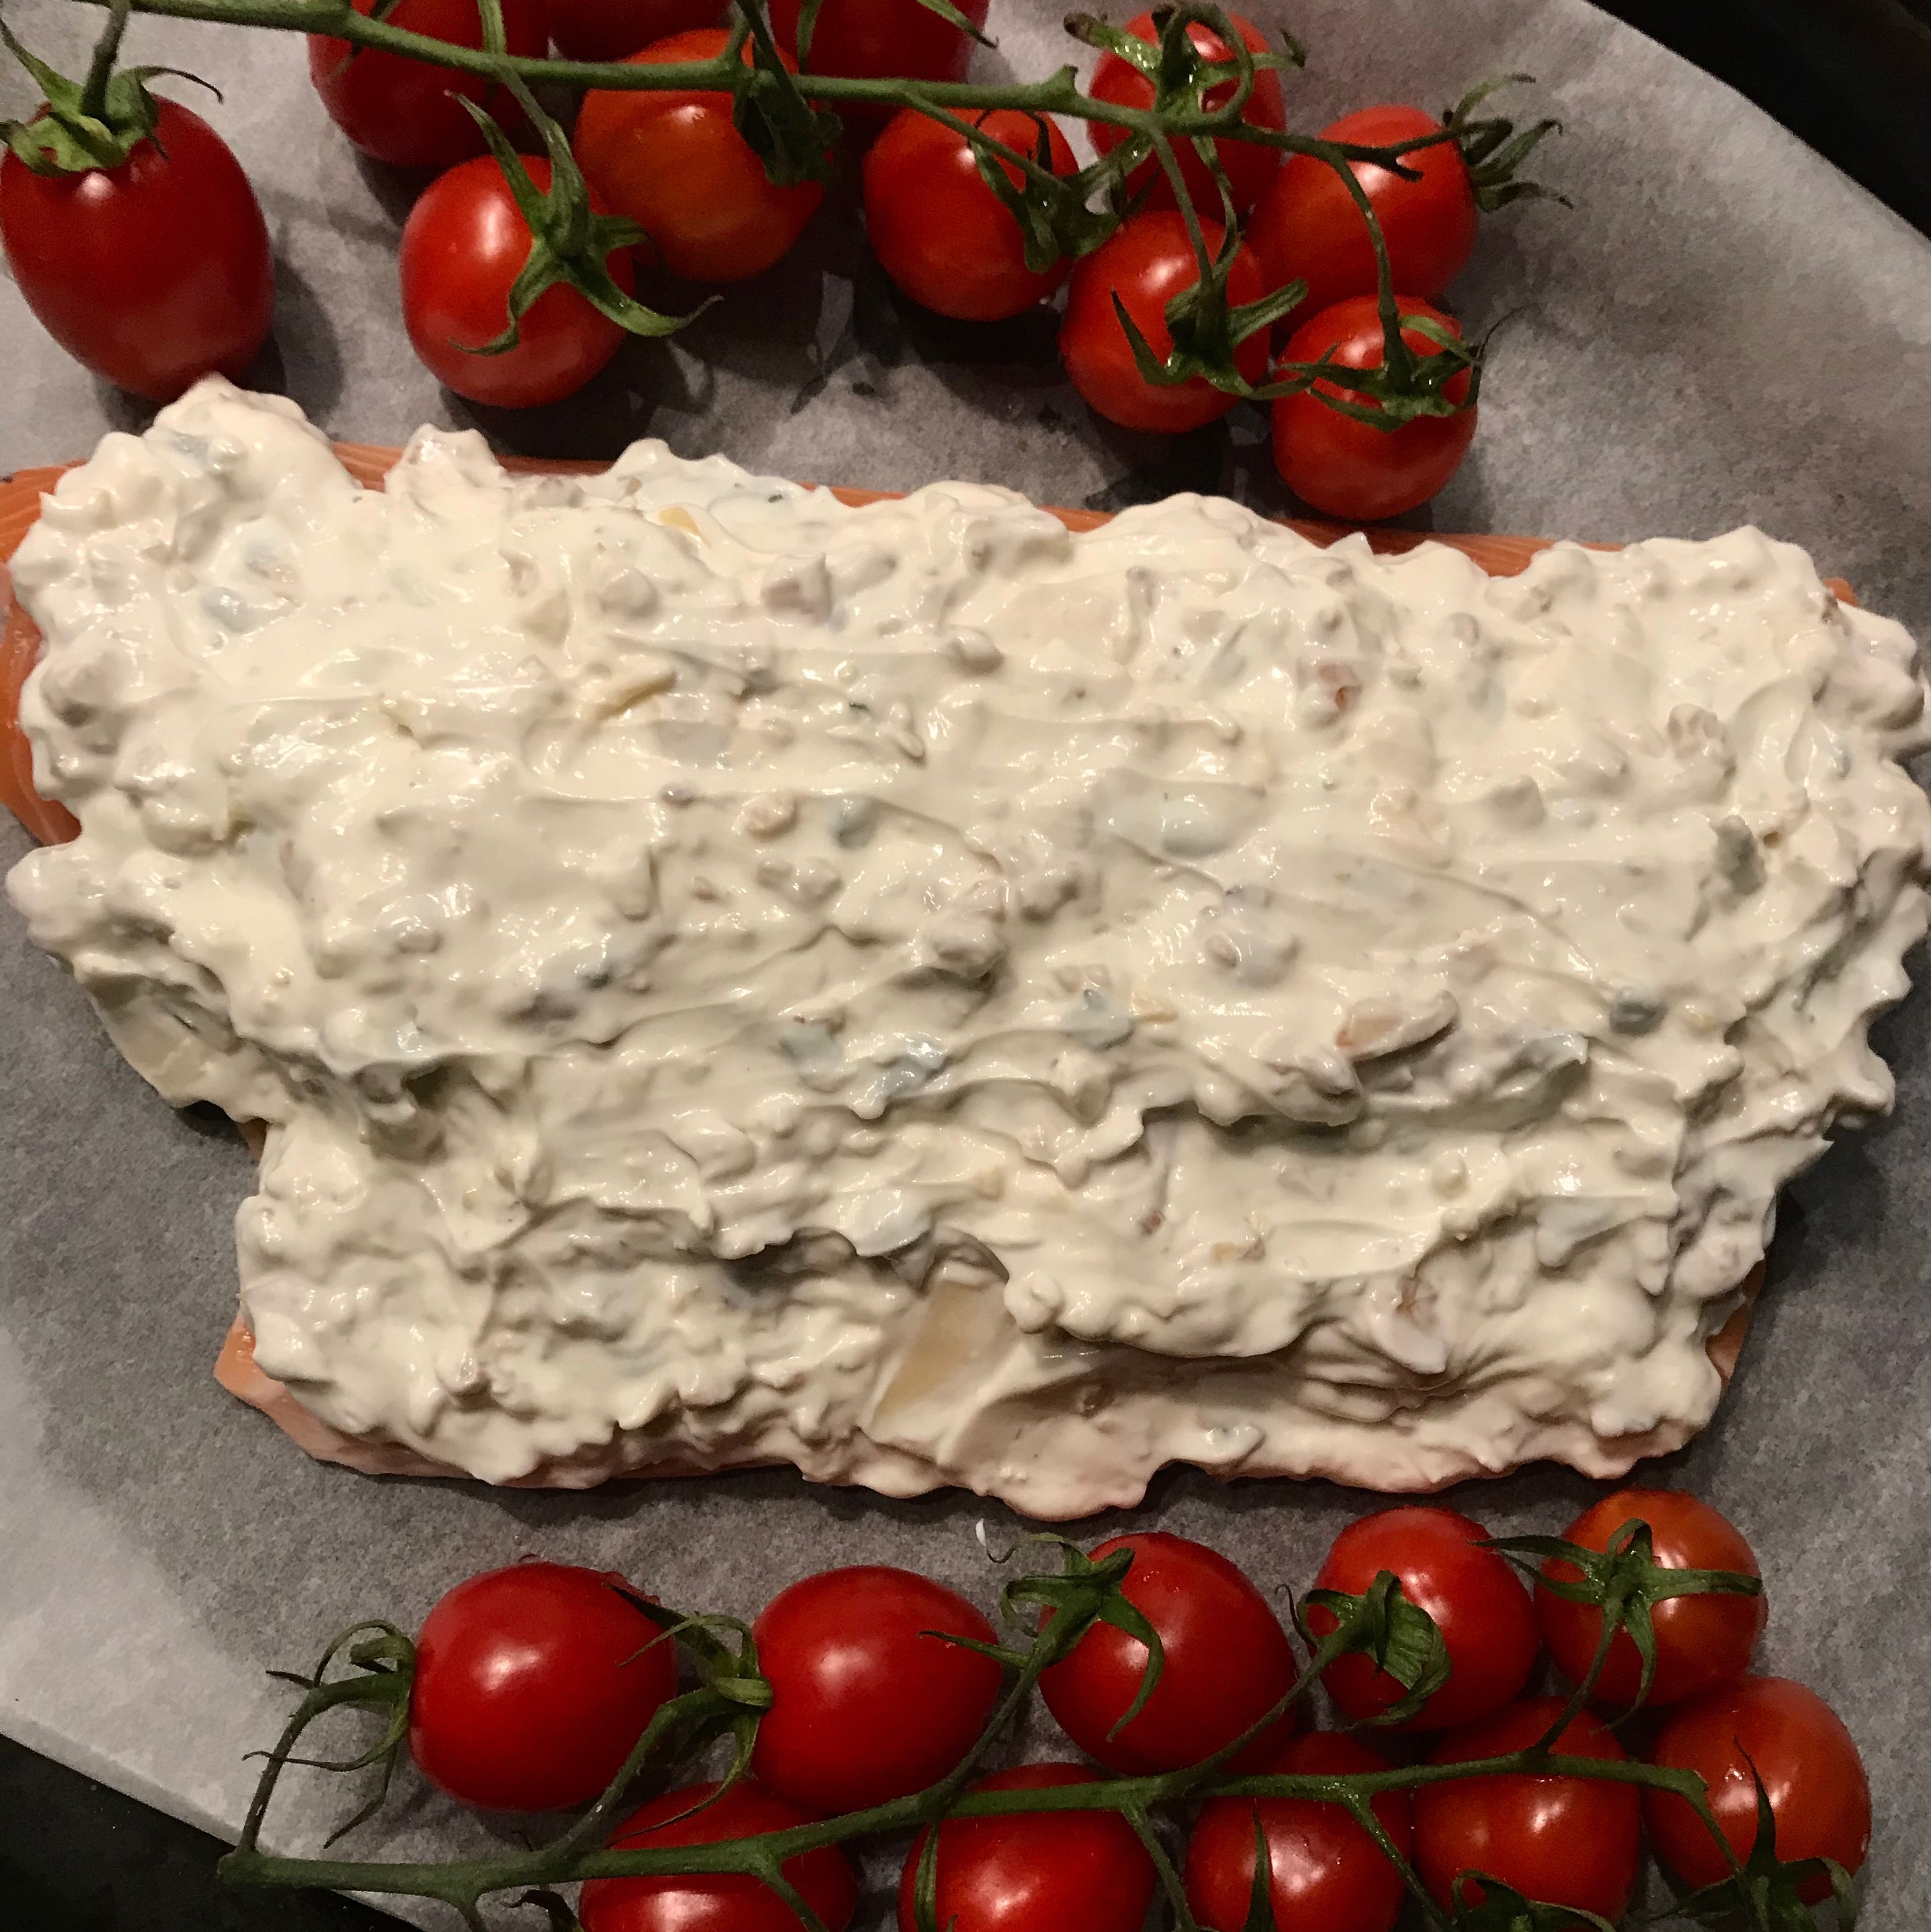 Place the salmon fillet on a baking paper sheet on an oven tray. Spread the yoghurt mix over the fillet. Place the tomatoes to the sides of the fillet.